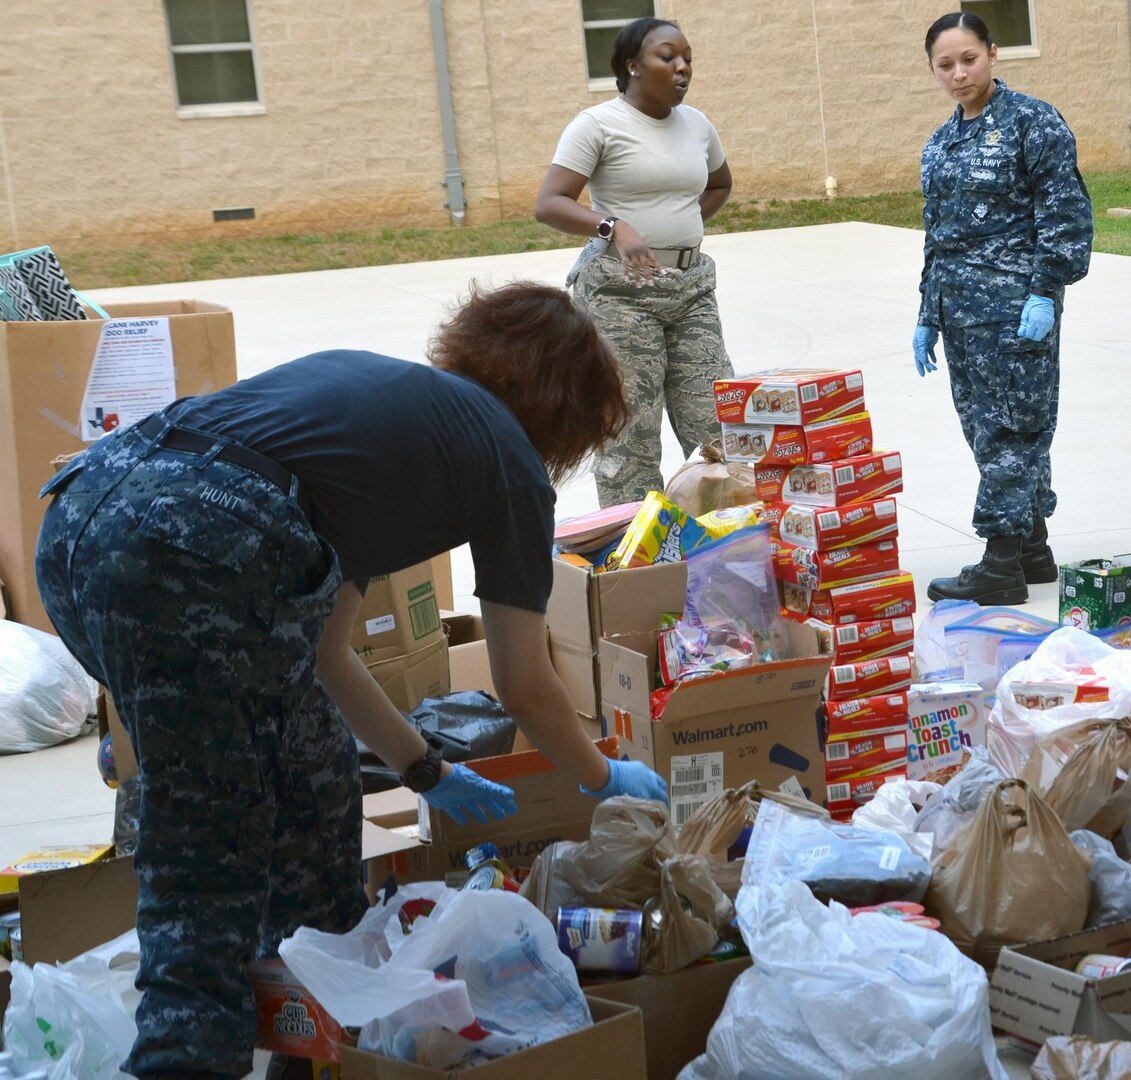 1st Lt. Ebony Shannon (center), Medical Education and Training Campus Support Center Information Technology Director, and Petty Officer 1st Class Alejandrina Alonzo, NMTSC Career Counselor, discuss plans for organizing the food donations collected for victims of Hurricane Harvey September 19. In all, the team collected and donated 450 pounds of food to the San Antonio Food Bank, $3,300 in donated diapers to the Diaper Bank, $19,000 in clothing and incidentals to the Salvation Army, and numerous donations to the American Society for the Prevention of Cruelty to Animals and homeless shelters.